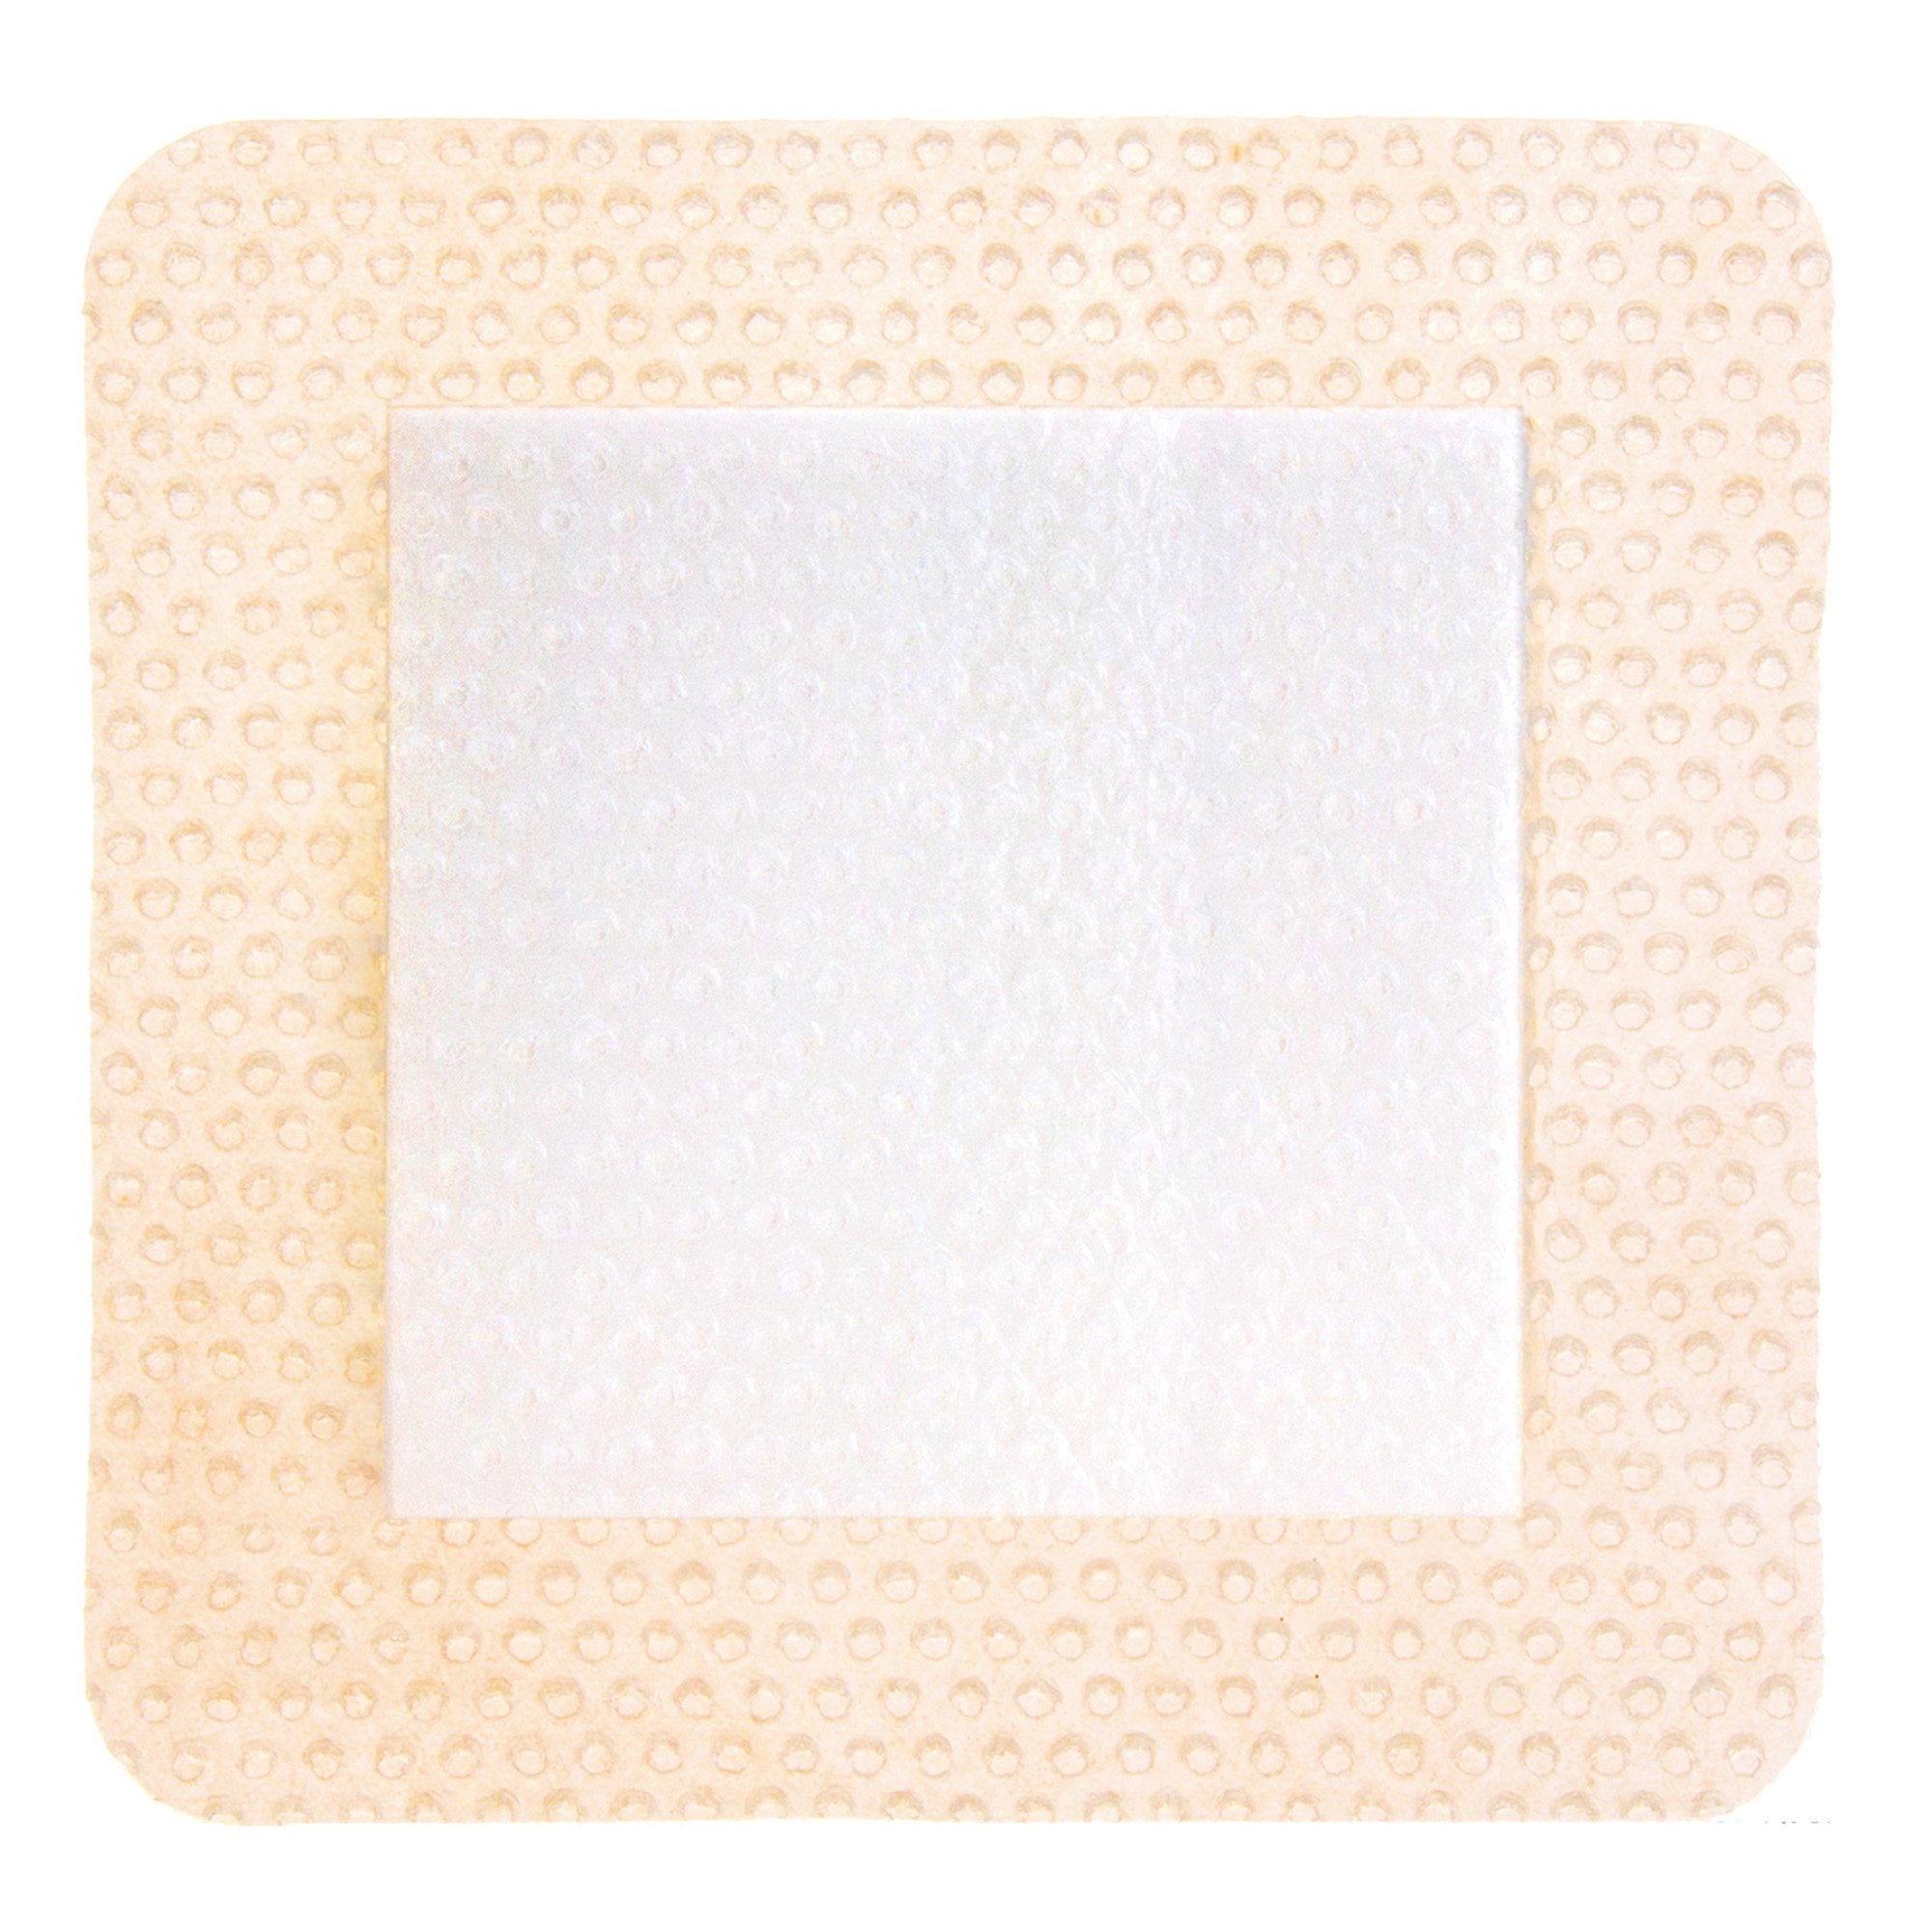 Foam Dressing ComfortFoam™ Border 4 X 8 Inch With Border Waterproof Backing Silicone Adhesive Rectangle Sterile